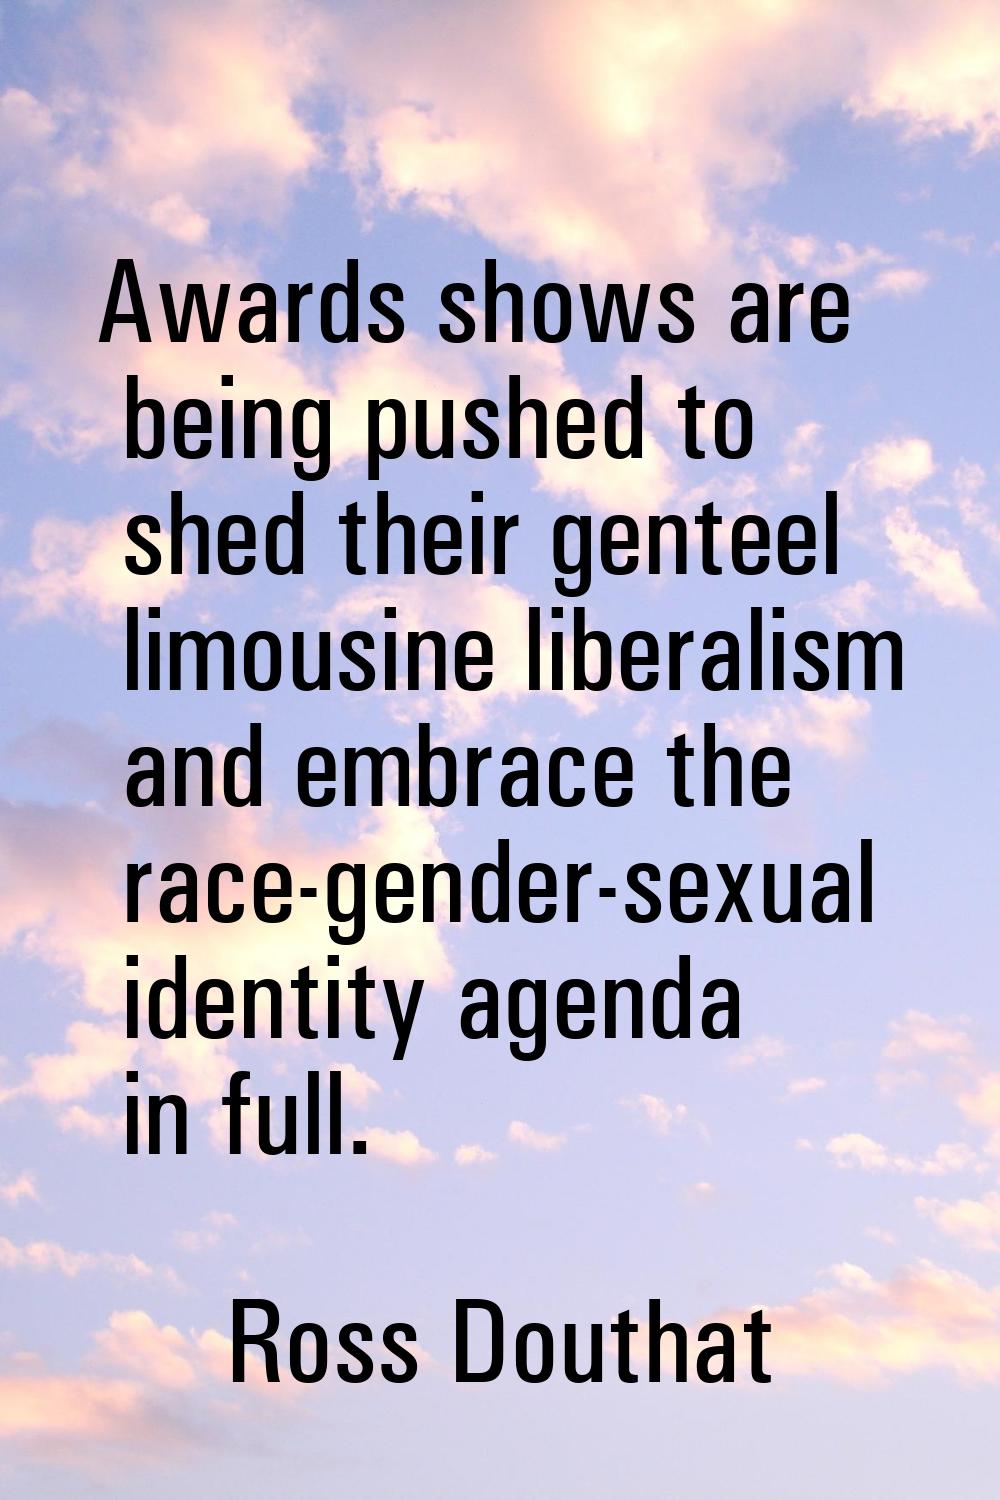 Awards shows are being pushed to shed their genteel limousine liberalism and embrace the race-gende